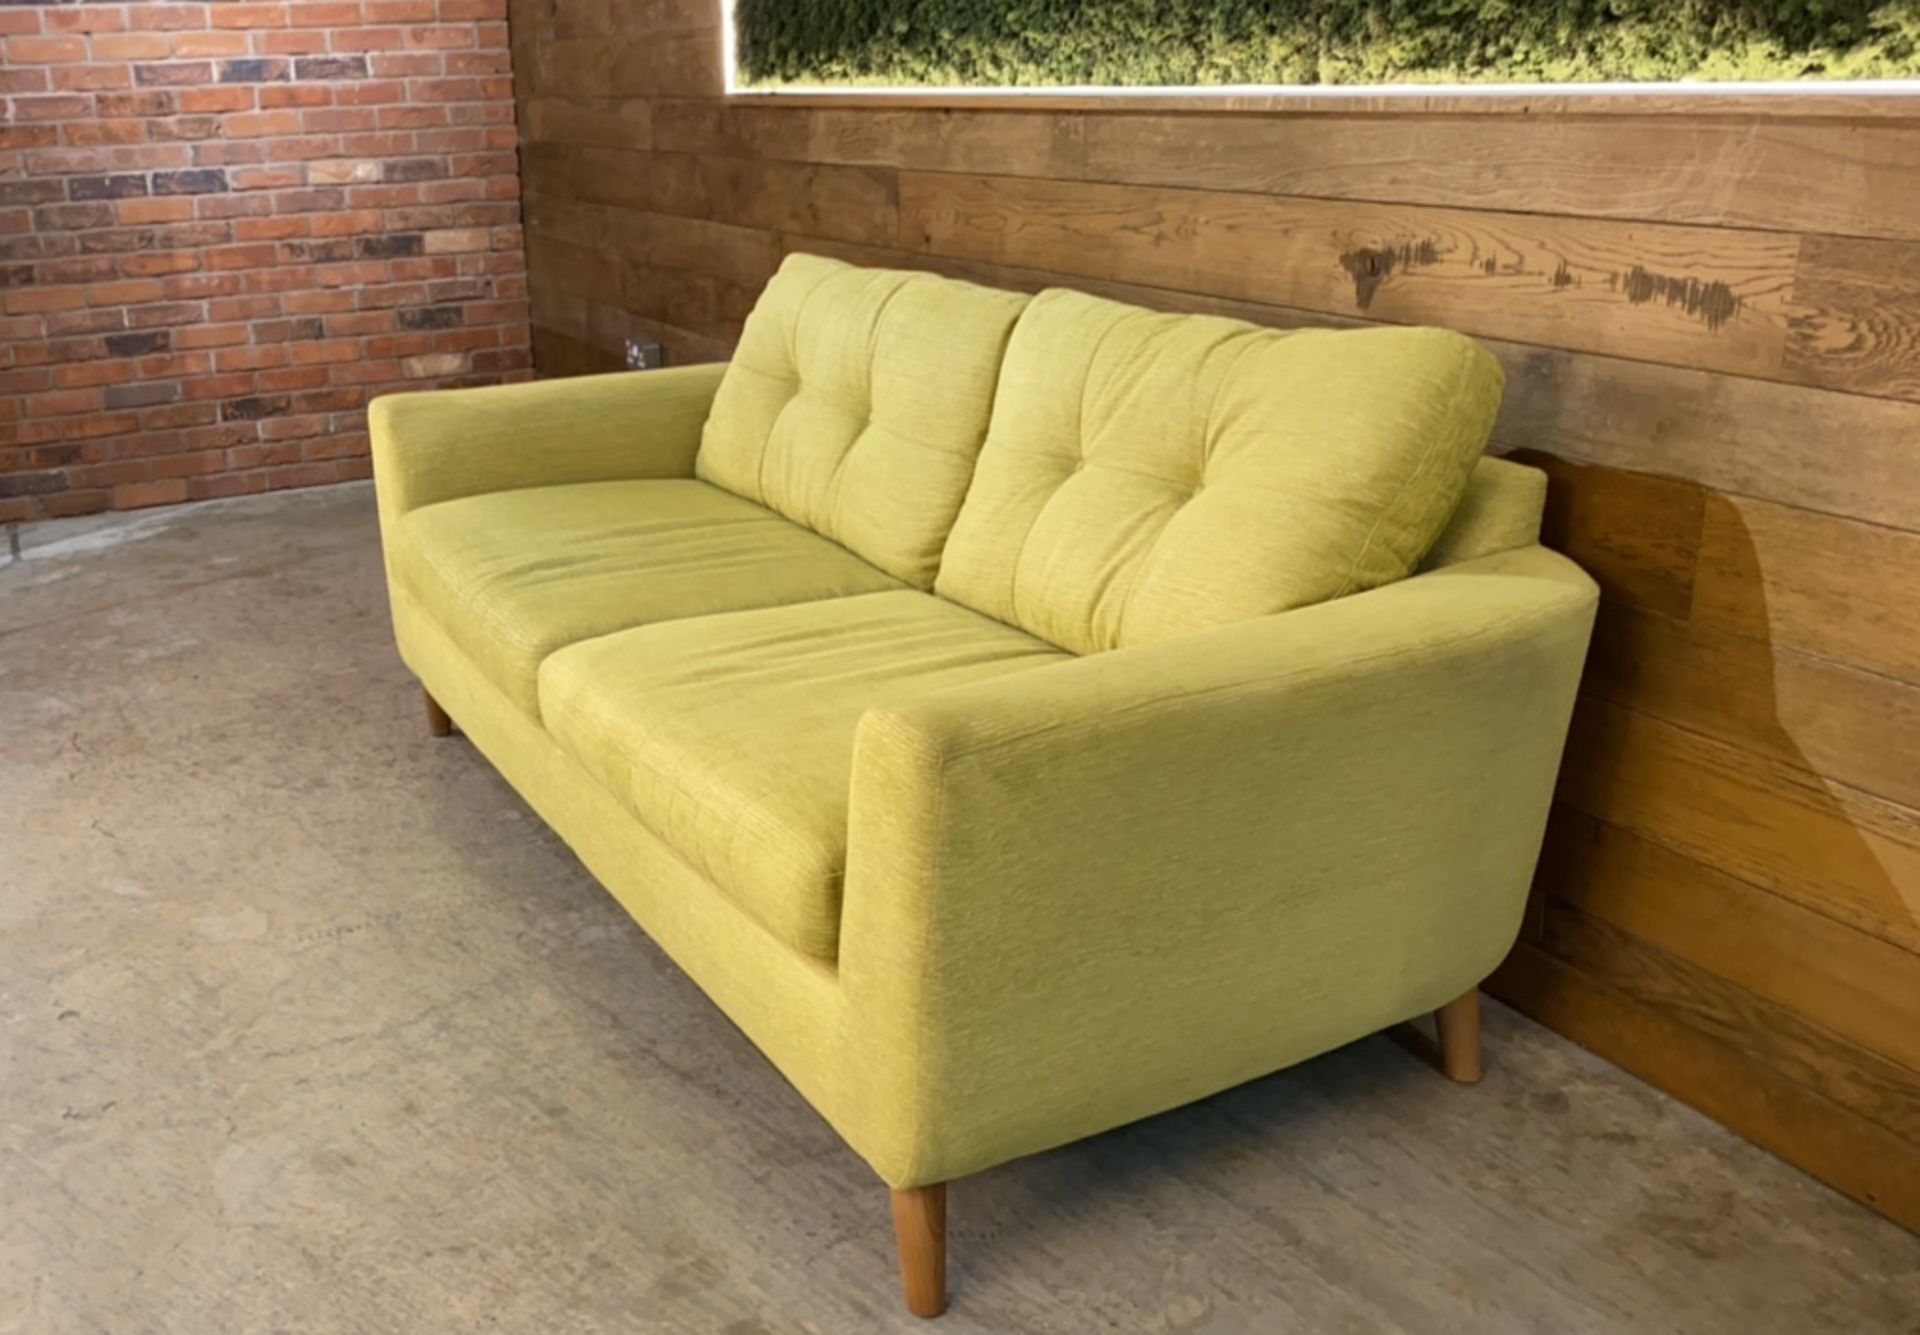 Two Seater Green Sofa - Image 5 of 5